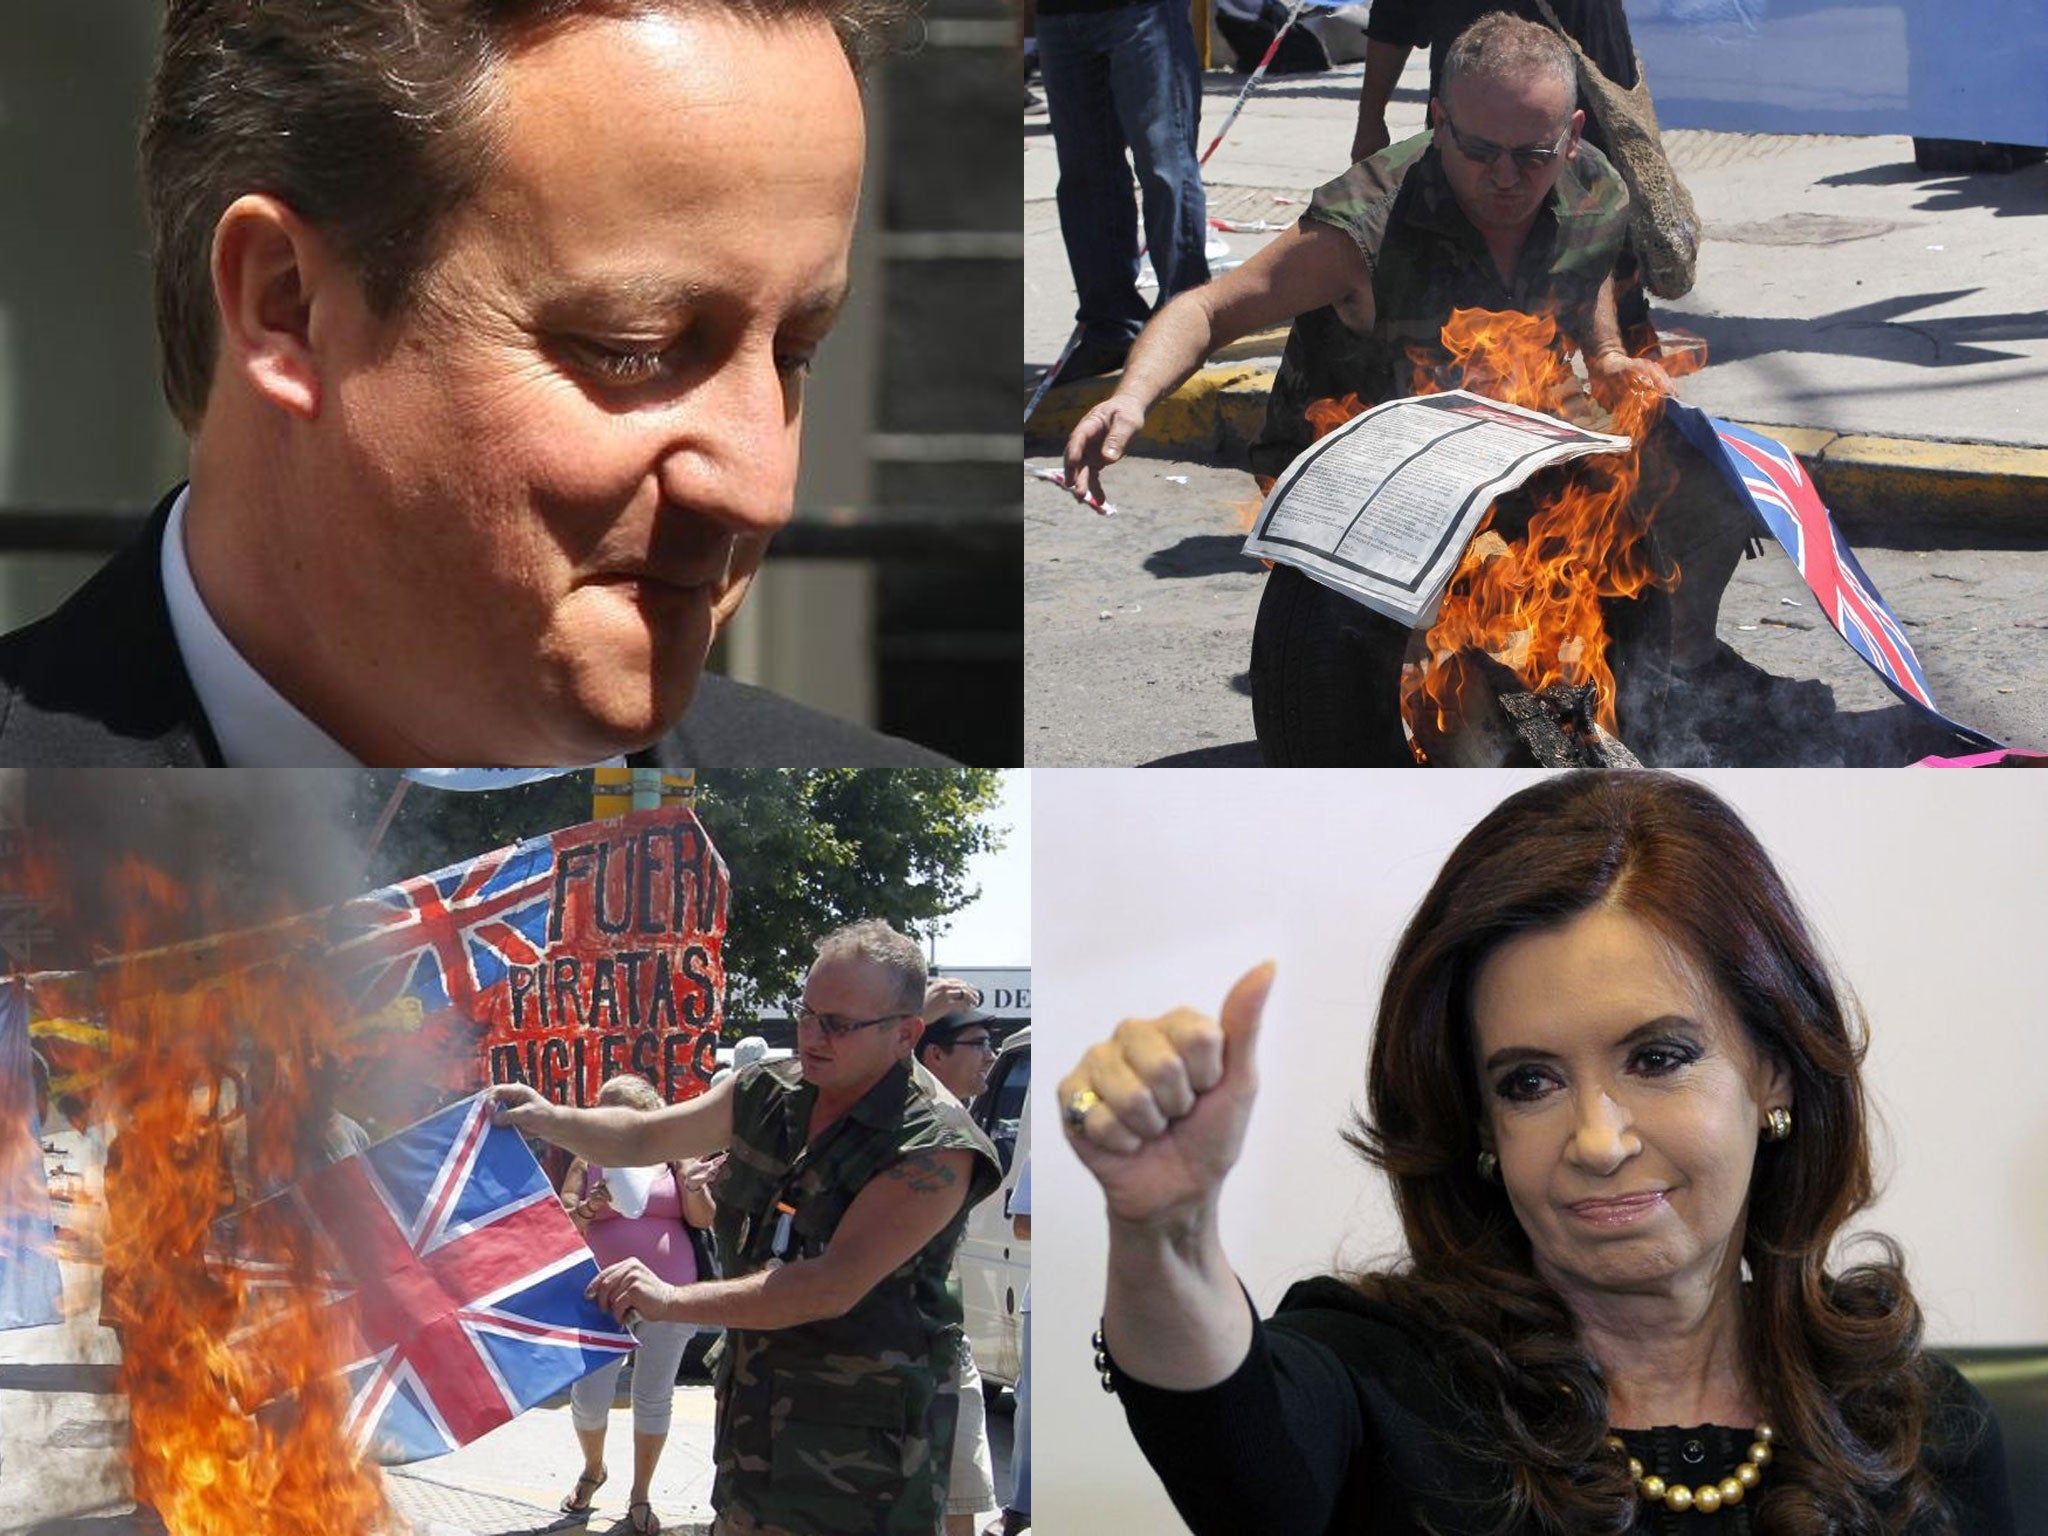 Clockwise from top left: David Cameron, An advert placed by the Sun is set on fire, Cristina Fernández de Kirchner,a British flag is set on fire during a protest by left-wing activists at the Buenos Aires